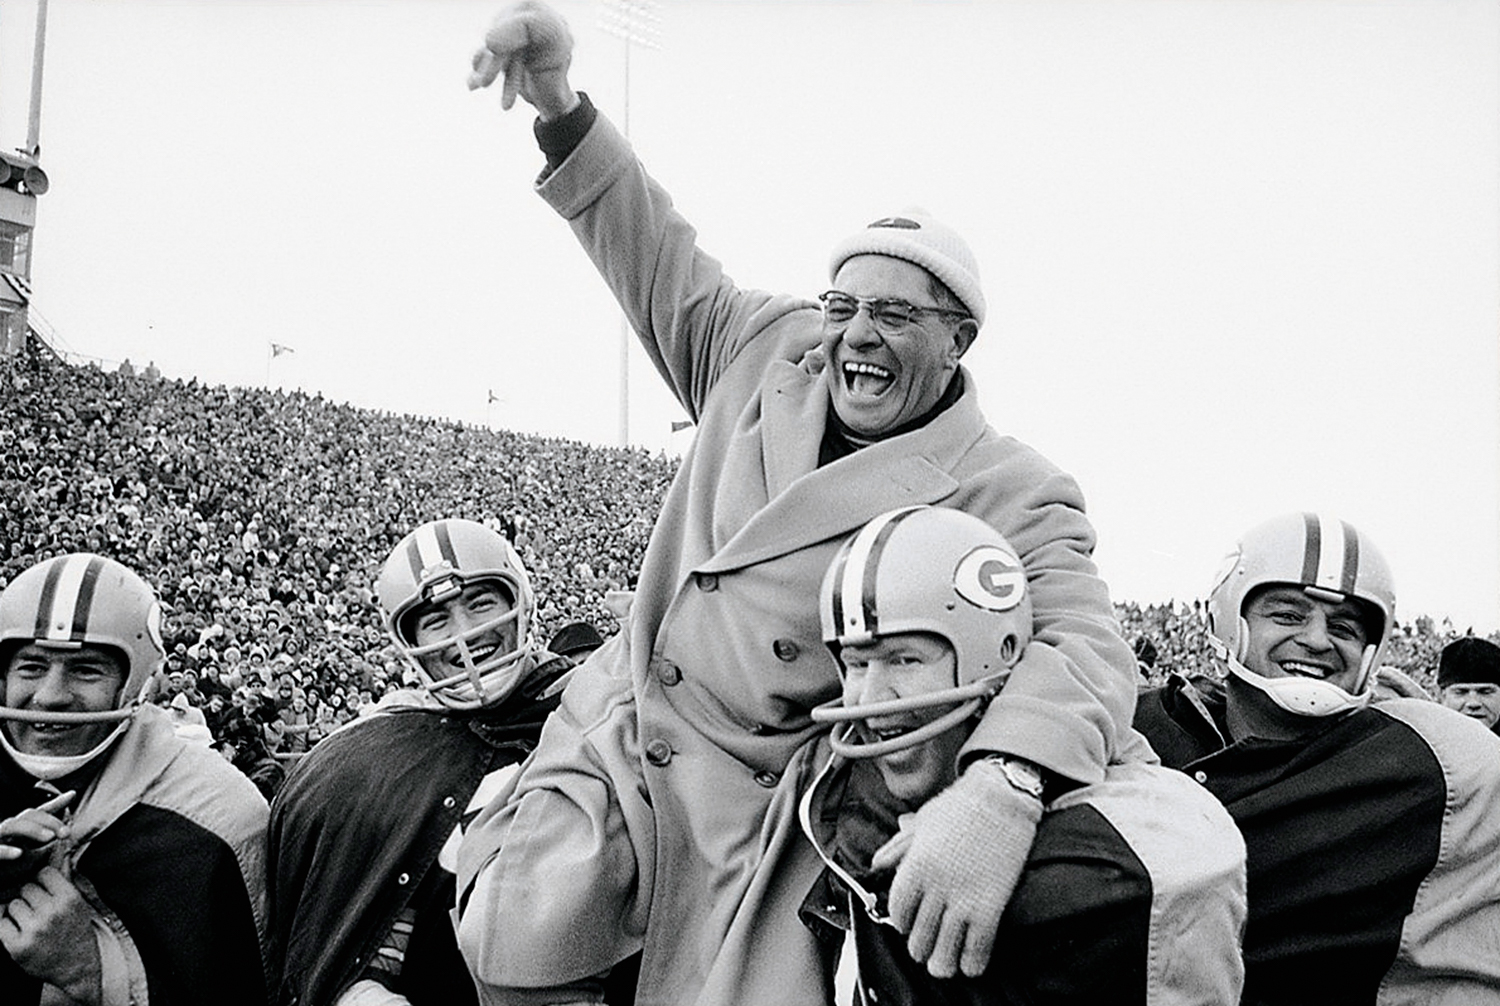 Green Bay Packers Coach Vince Lombardi, 1961 NFL Championship